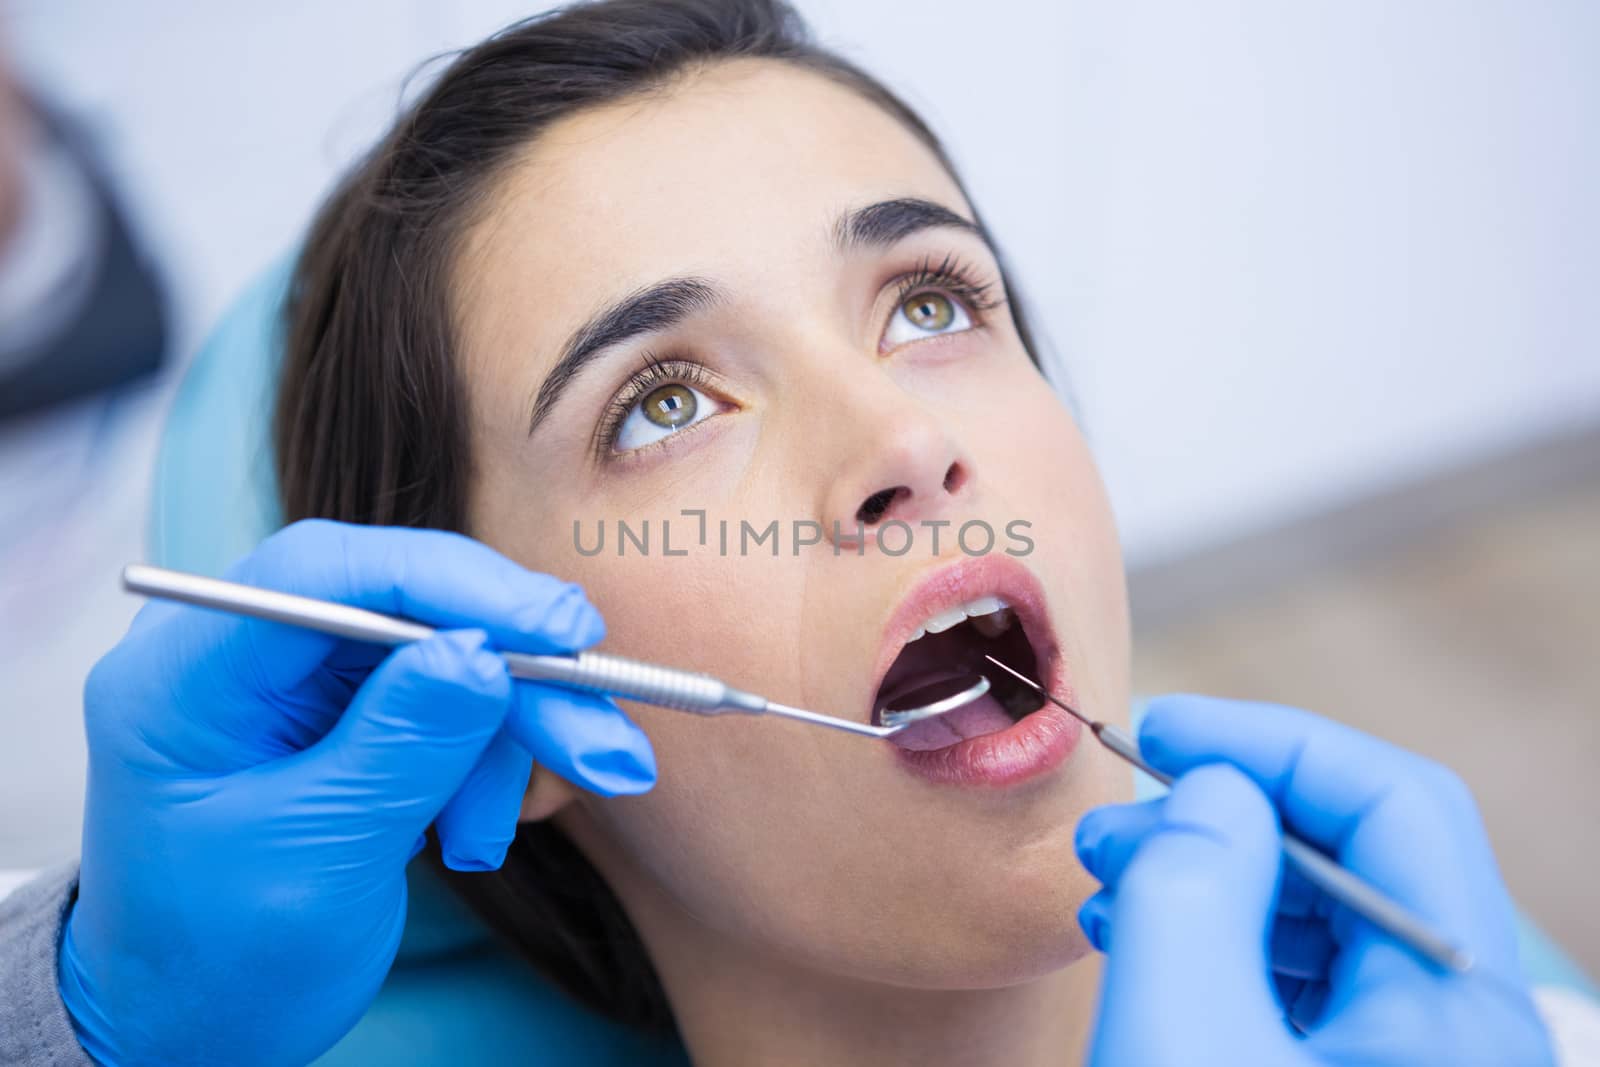 Dentist holding equipments while examining woman at medical clinic by Wavebreakmedia